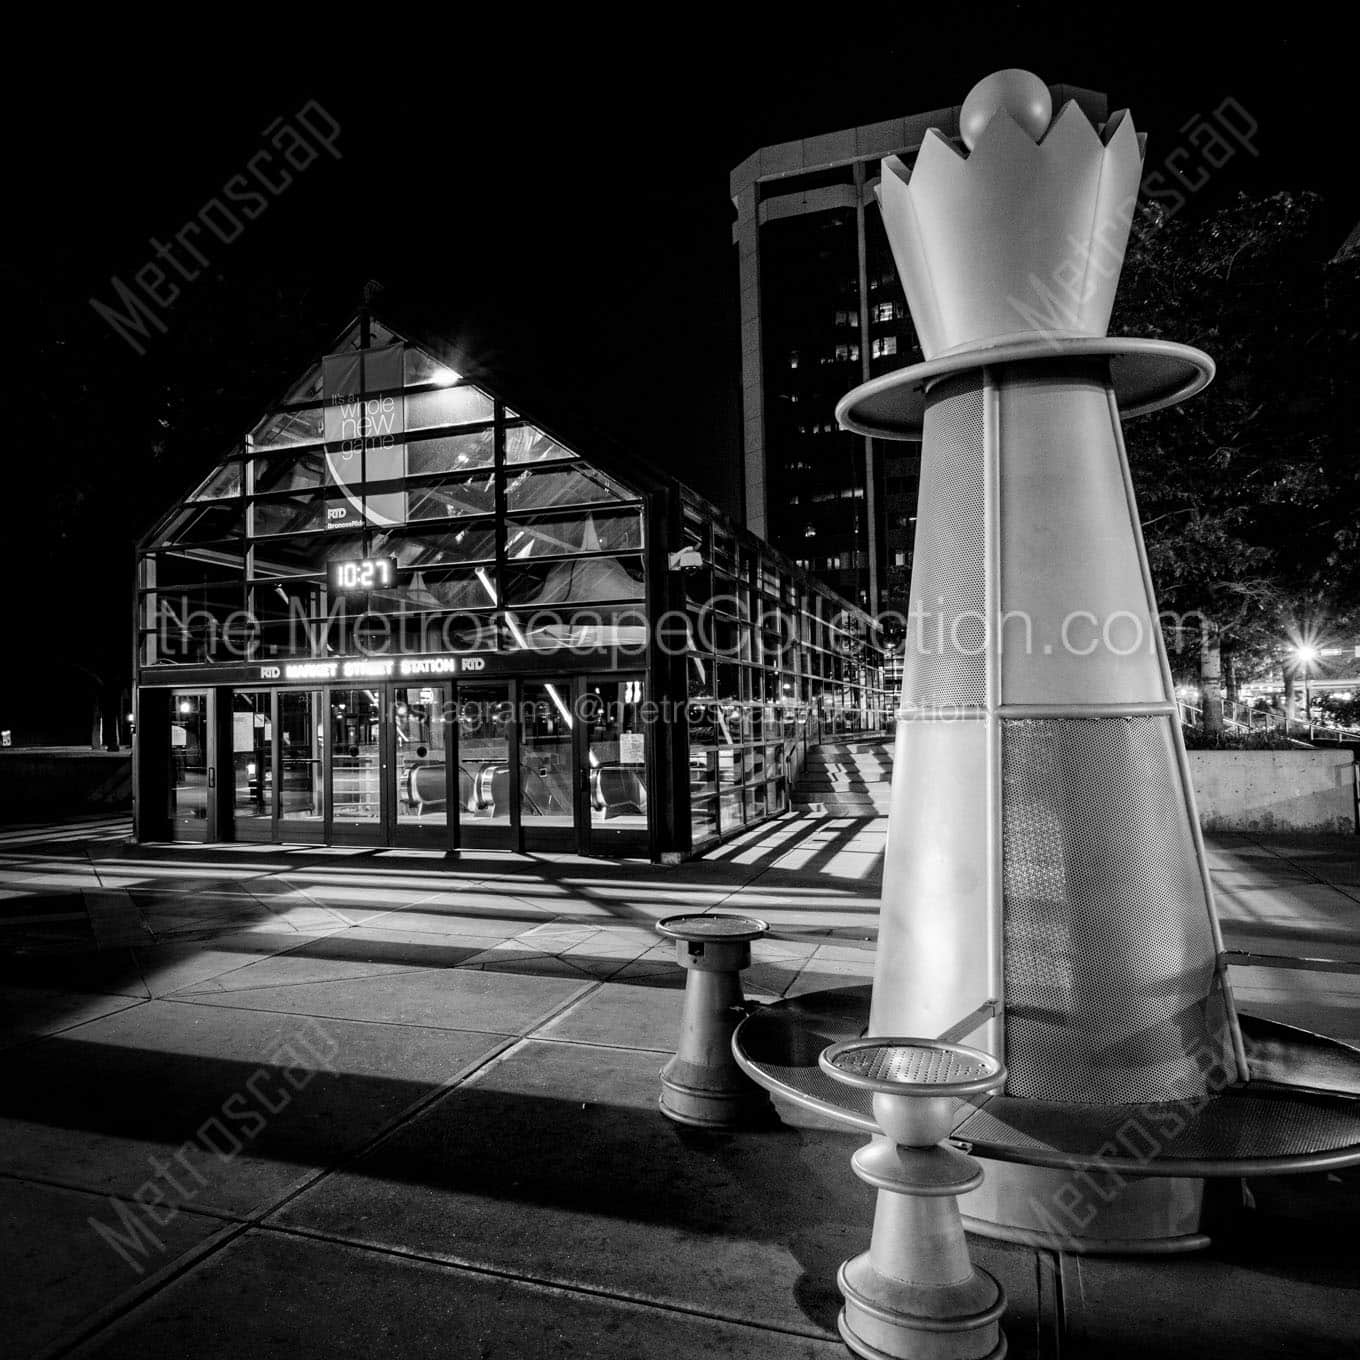 chess queen rtd station Black & White Wall Art